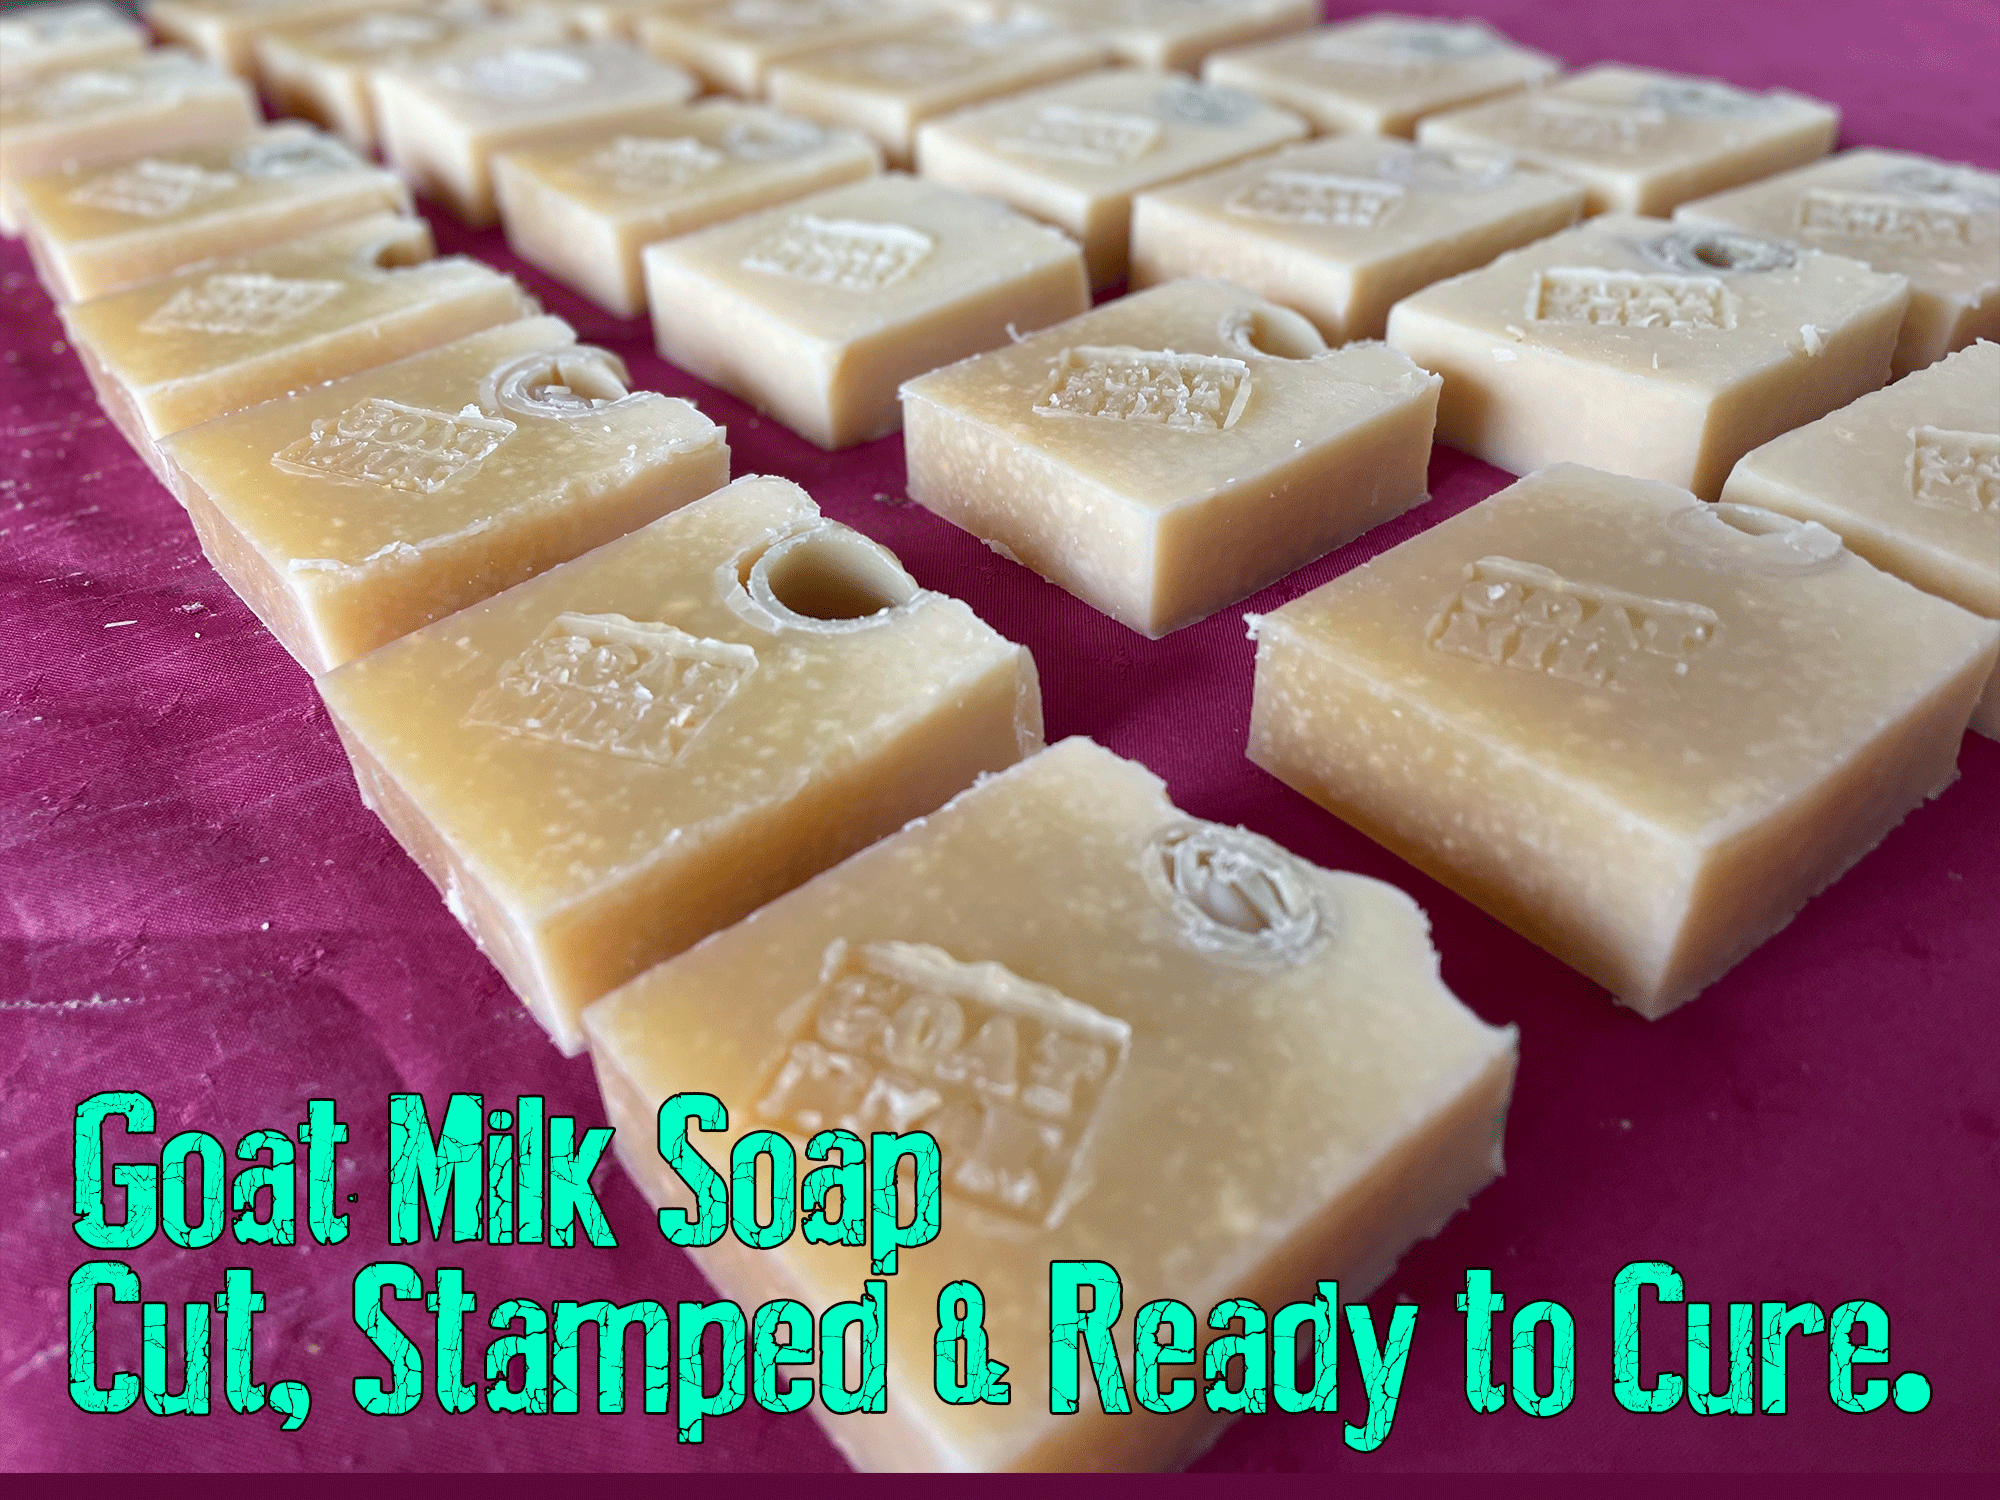 Goat Milk Soap are ready for cutting